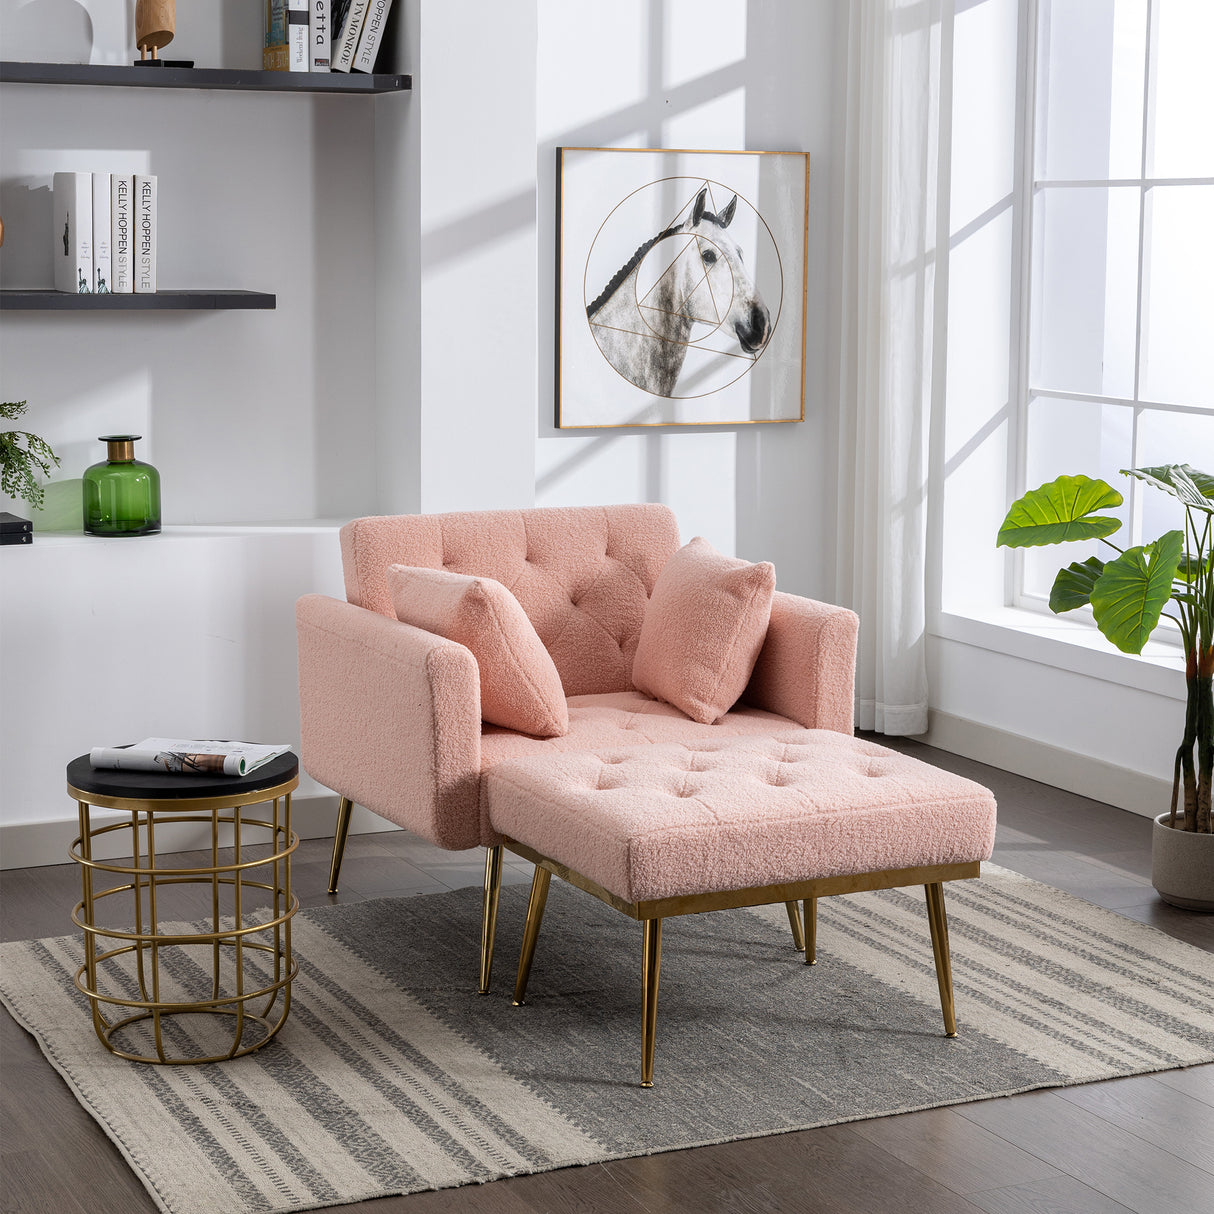 36.61'' Wide Modern Accent Chair With 3 Positions Adjustable Backrest, Tufted Chaise Lounge Chair, Single Recliner Armchair With Ottoman And Gold Legs For Living Room, Bedroom (Pink) - Home Elegance USA